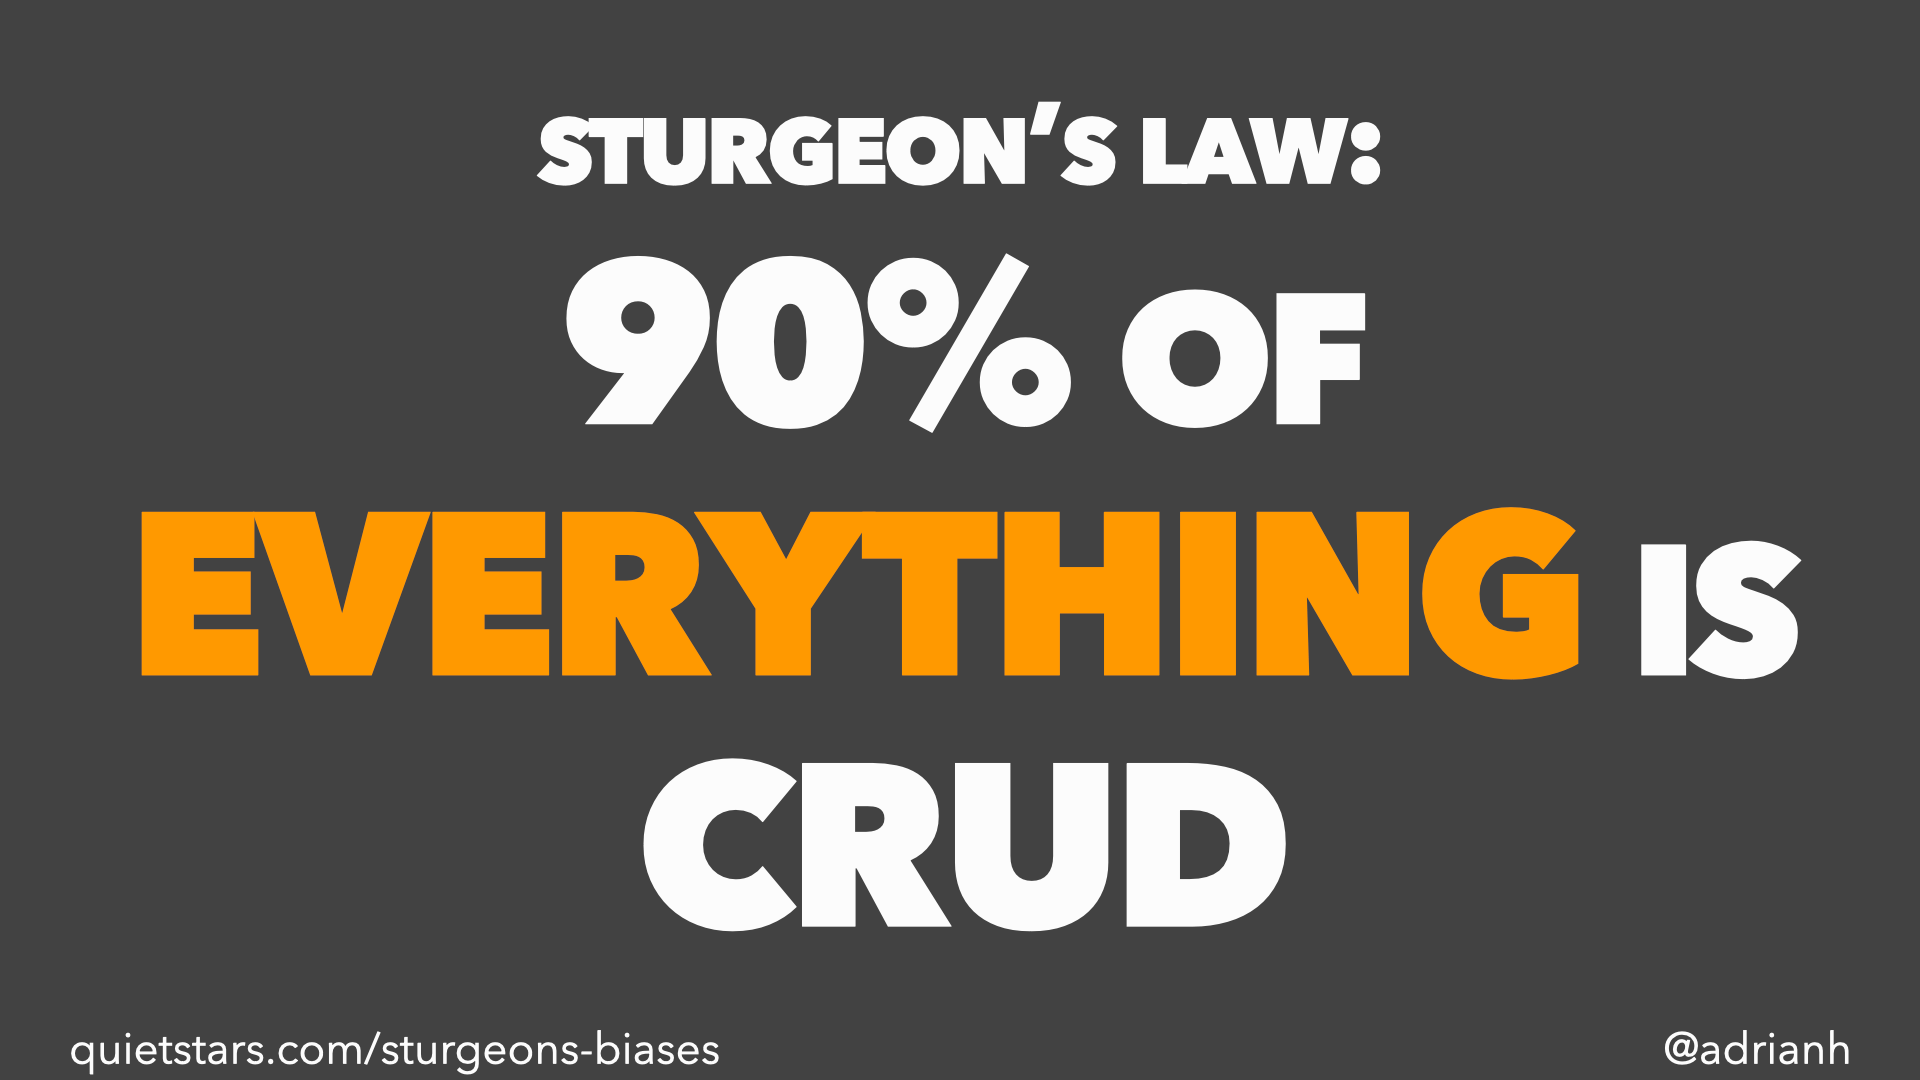 Sturgeon’s Law: 90% of everything is crud